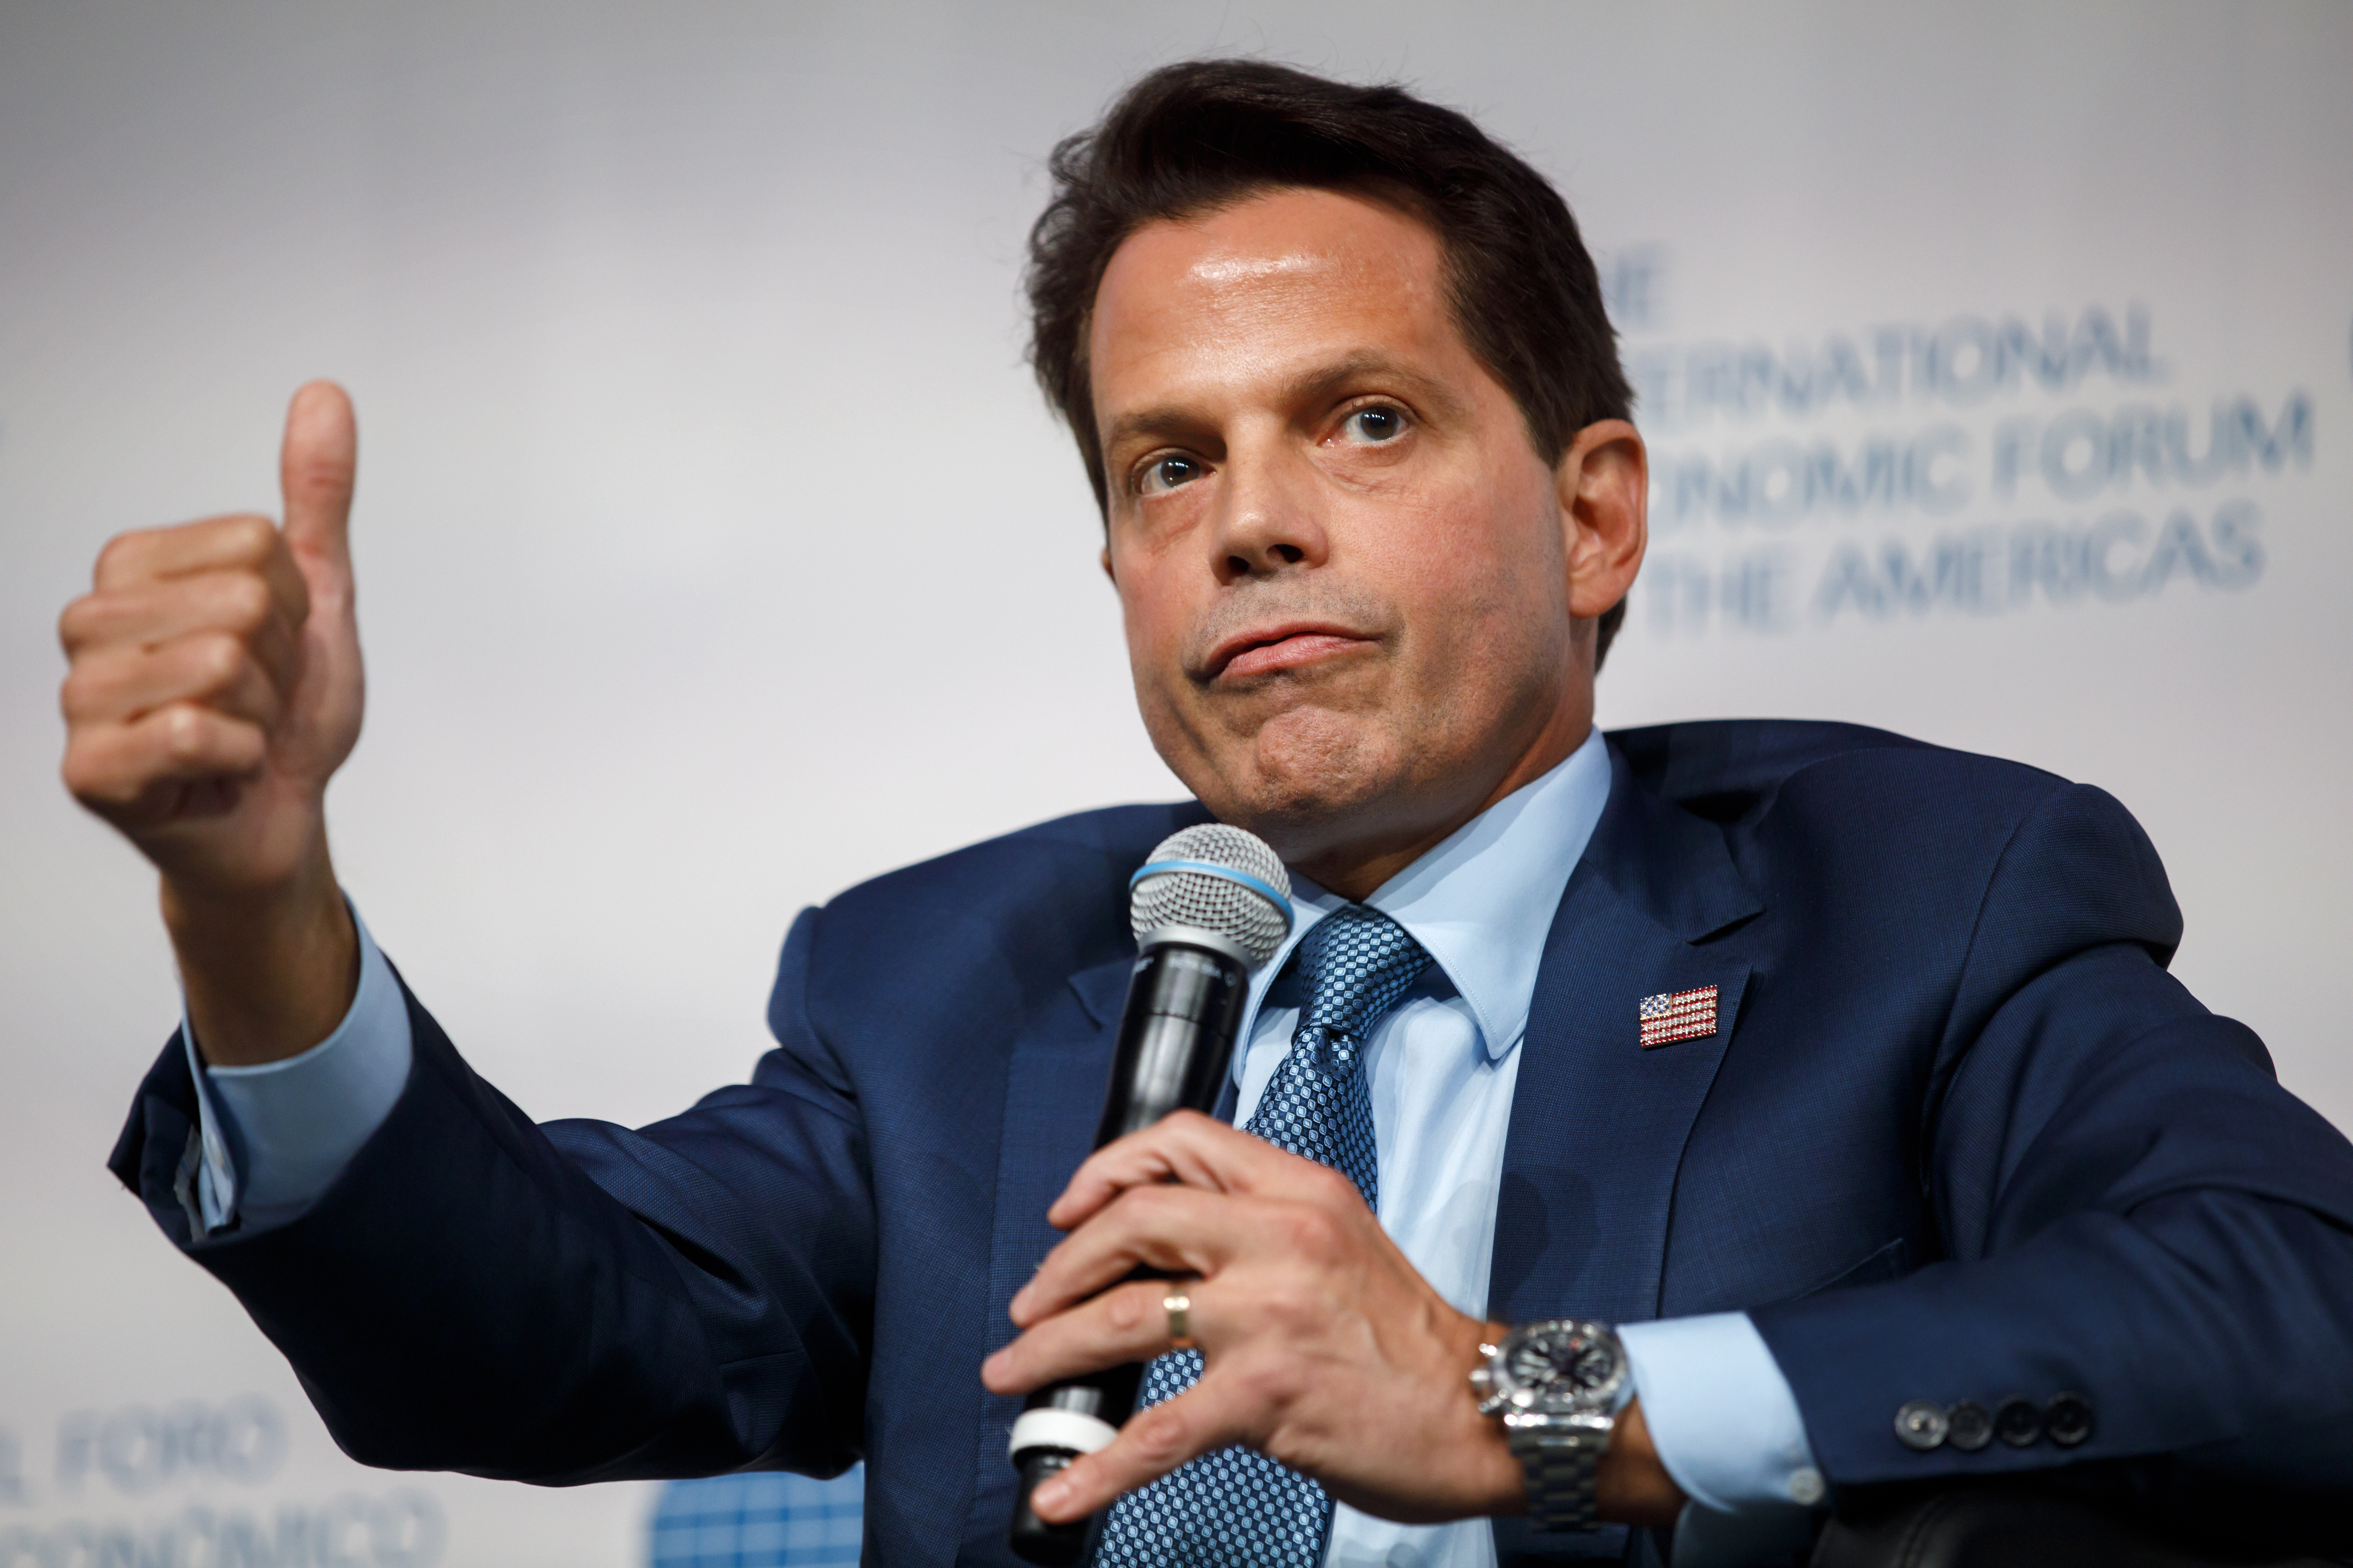 Scaramucci’s crypto pivot comes with an eye on tripling assets